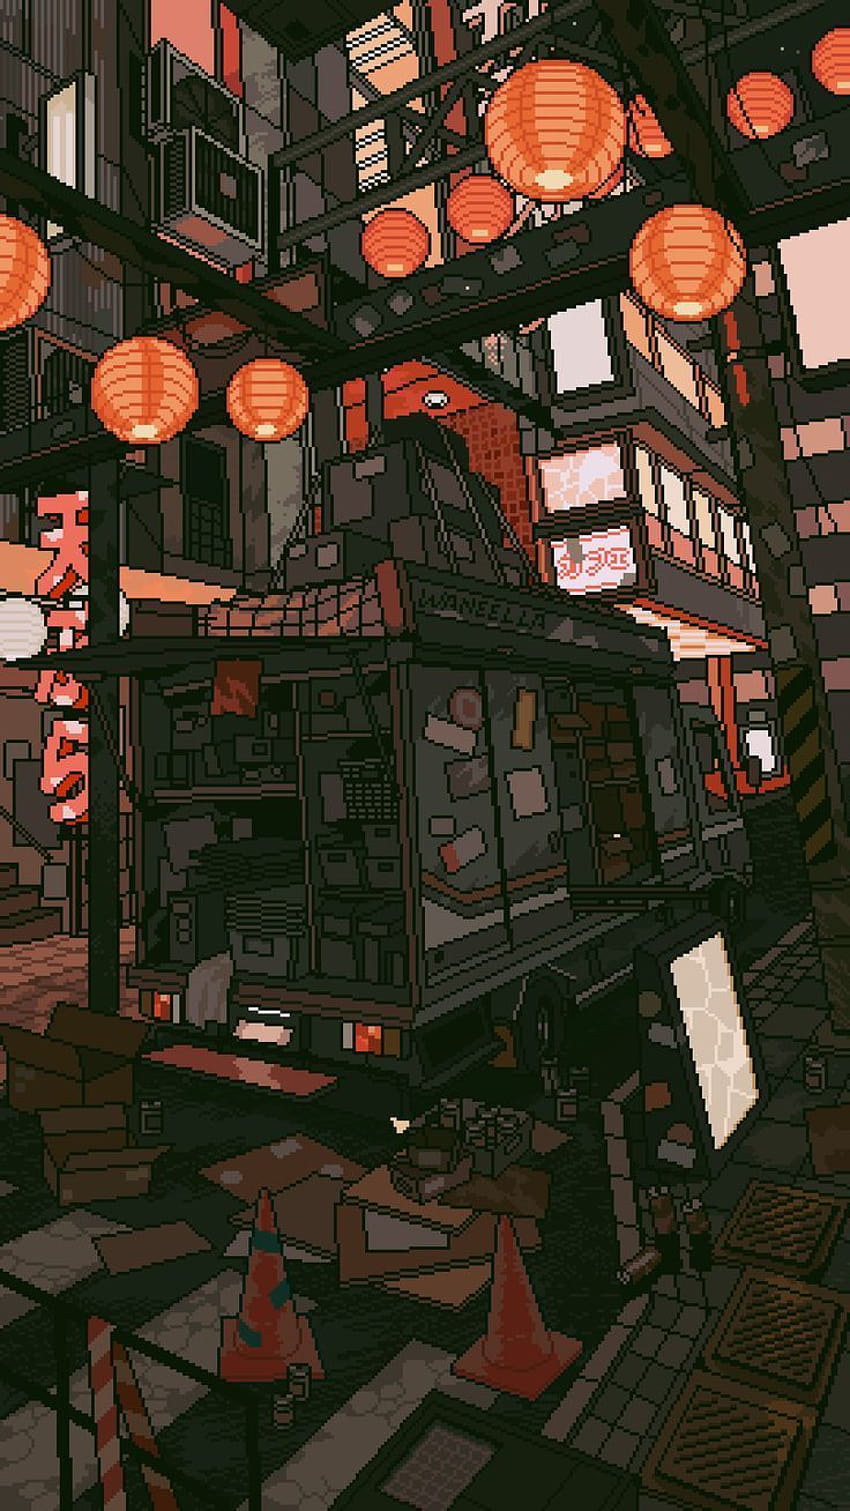 A pixel art image of a street at night with Chinese lanterns hanging from the buildings. - Pixel art